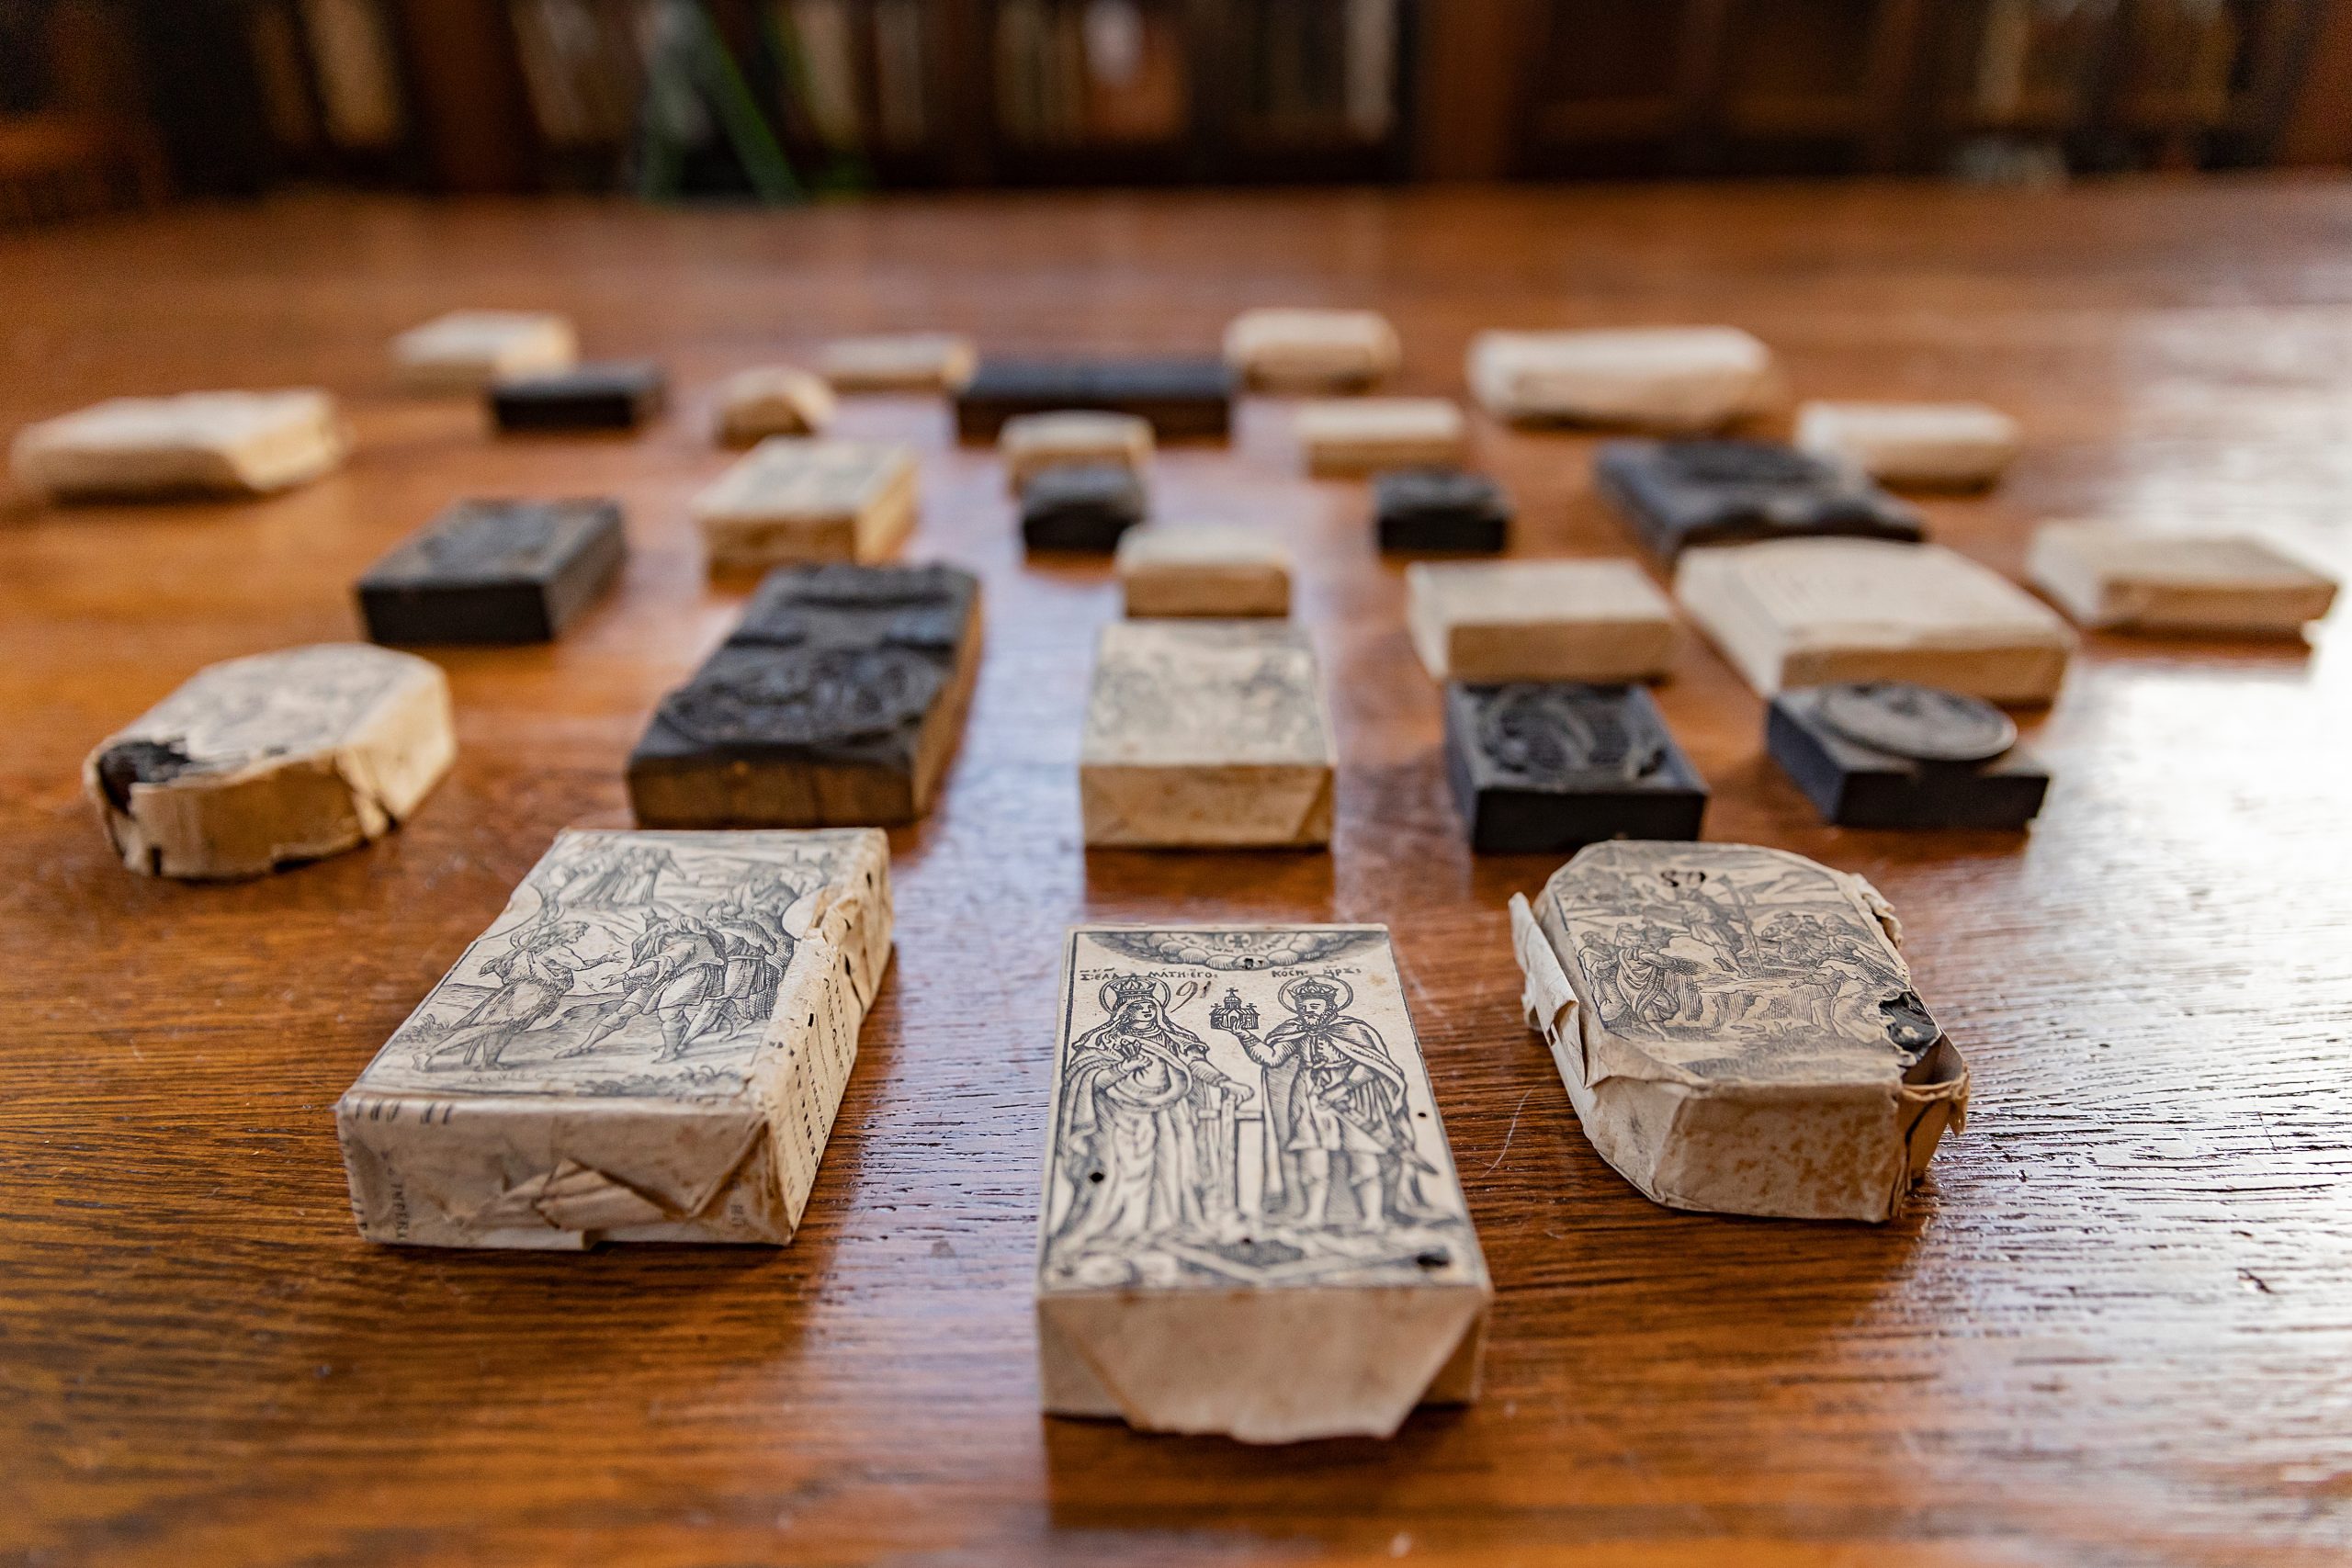 A series of woodblocks are lined up on a wooden table in the Fearrington Reading Room. Each block depicts a unique image. Some blocks are covered in paper wrappings.